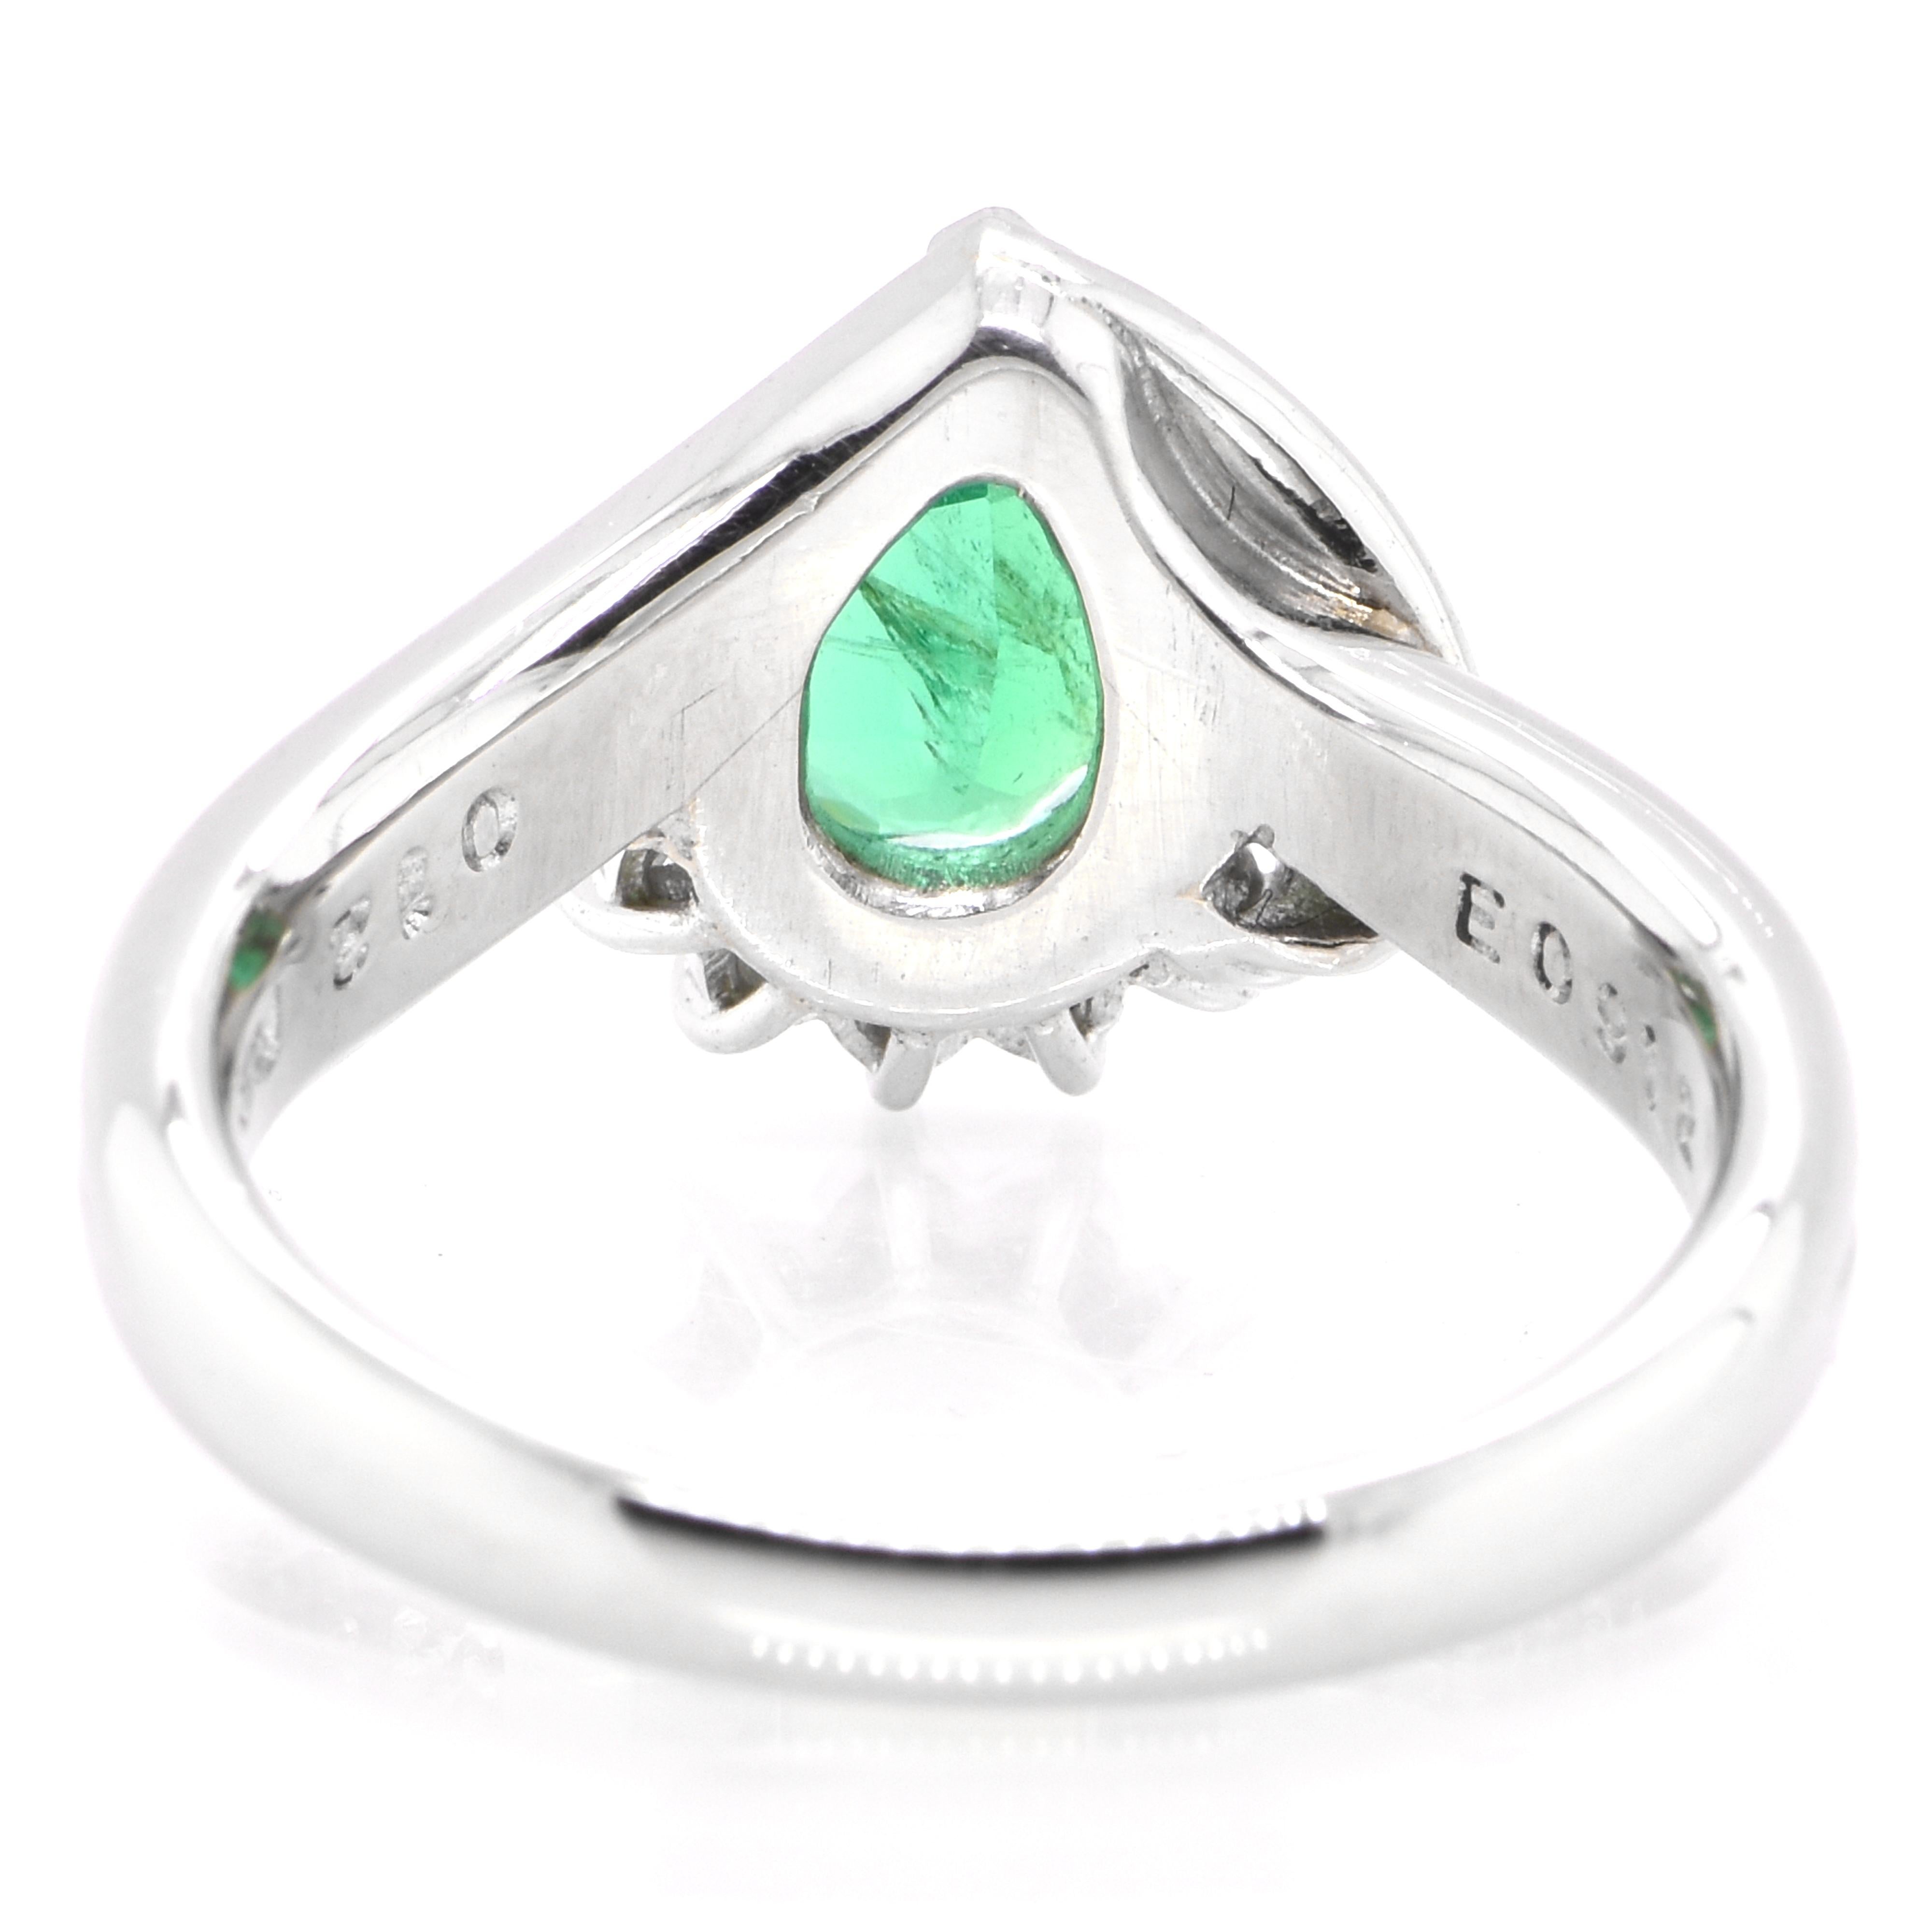 Women's 0.91 Carat Colombian, Pear-Cut Emerald and Diamond Ring Set in Platinum For Sale